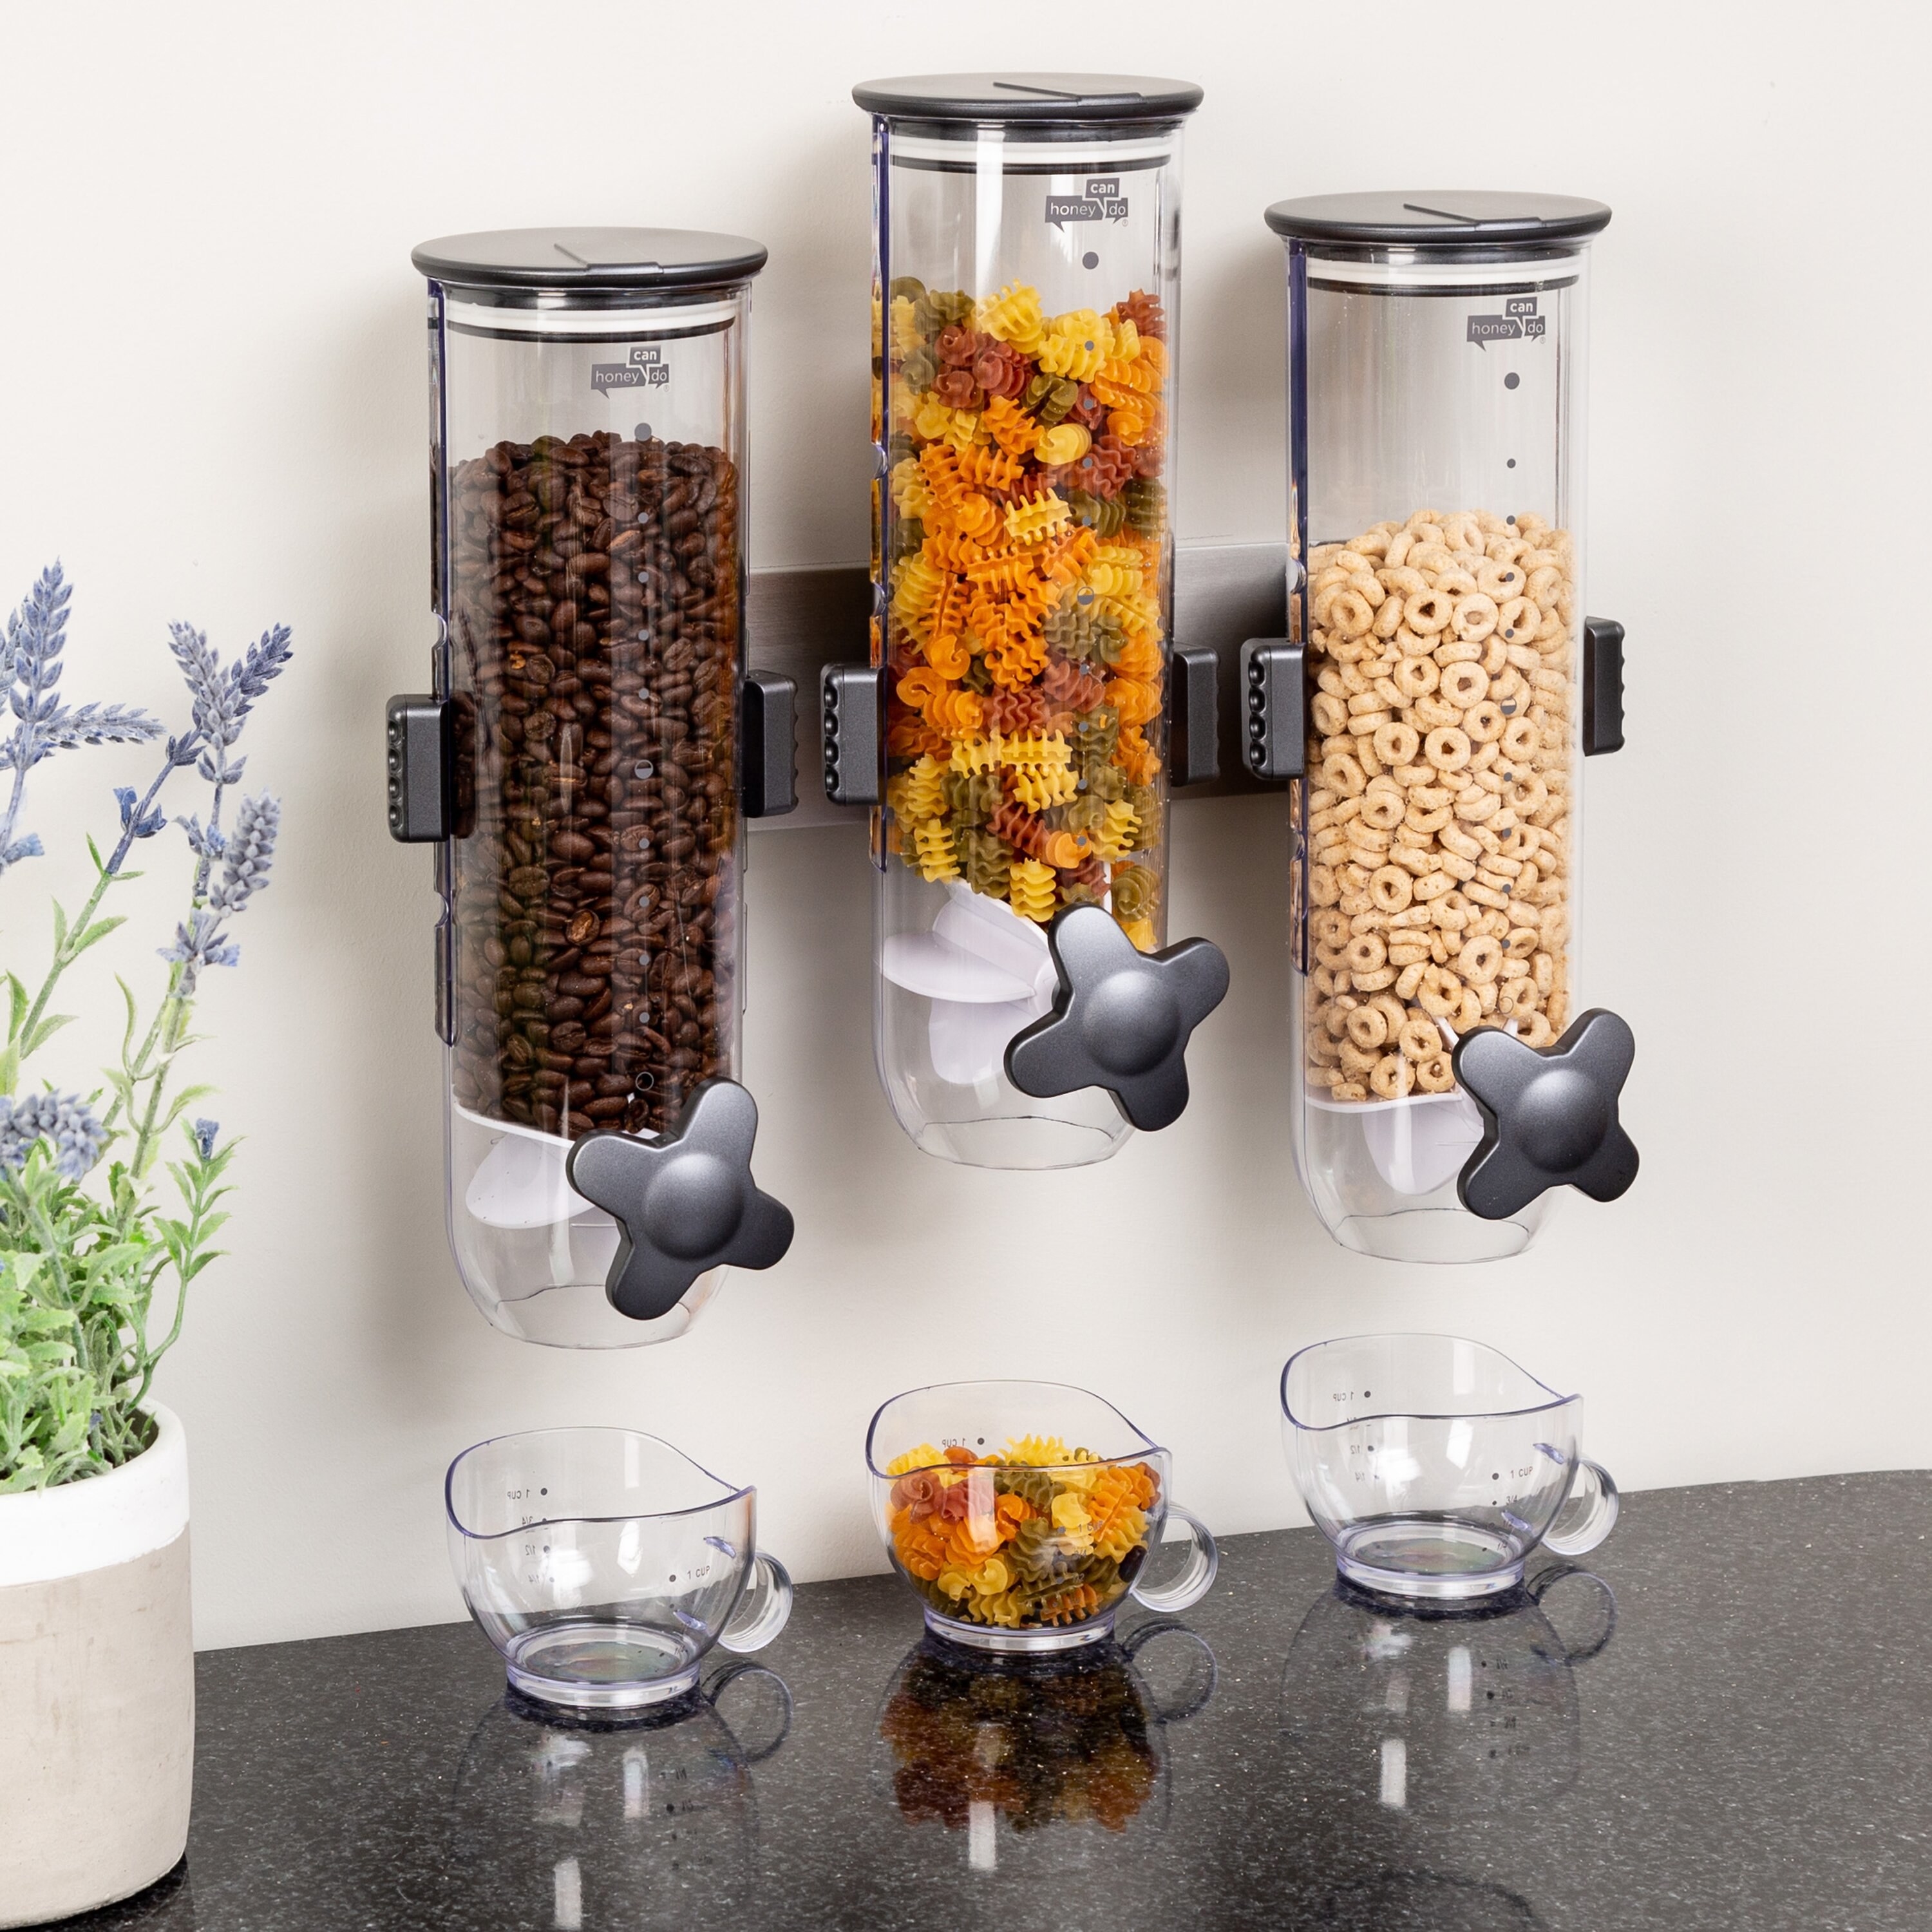 The there dispensers with beans, pasta, and cereal in them